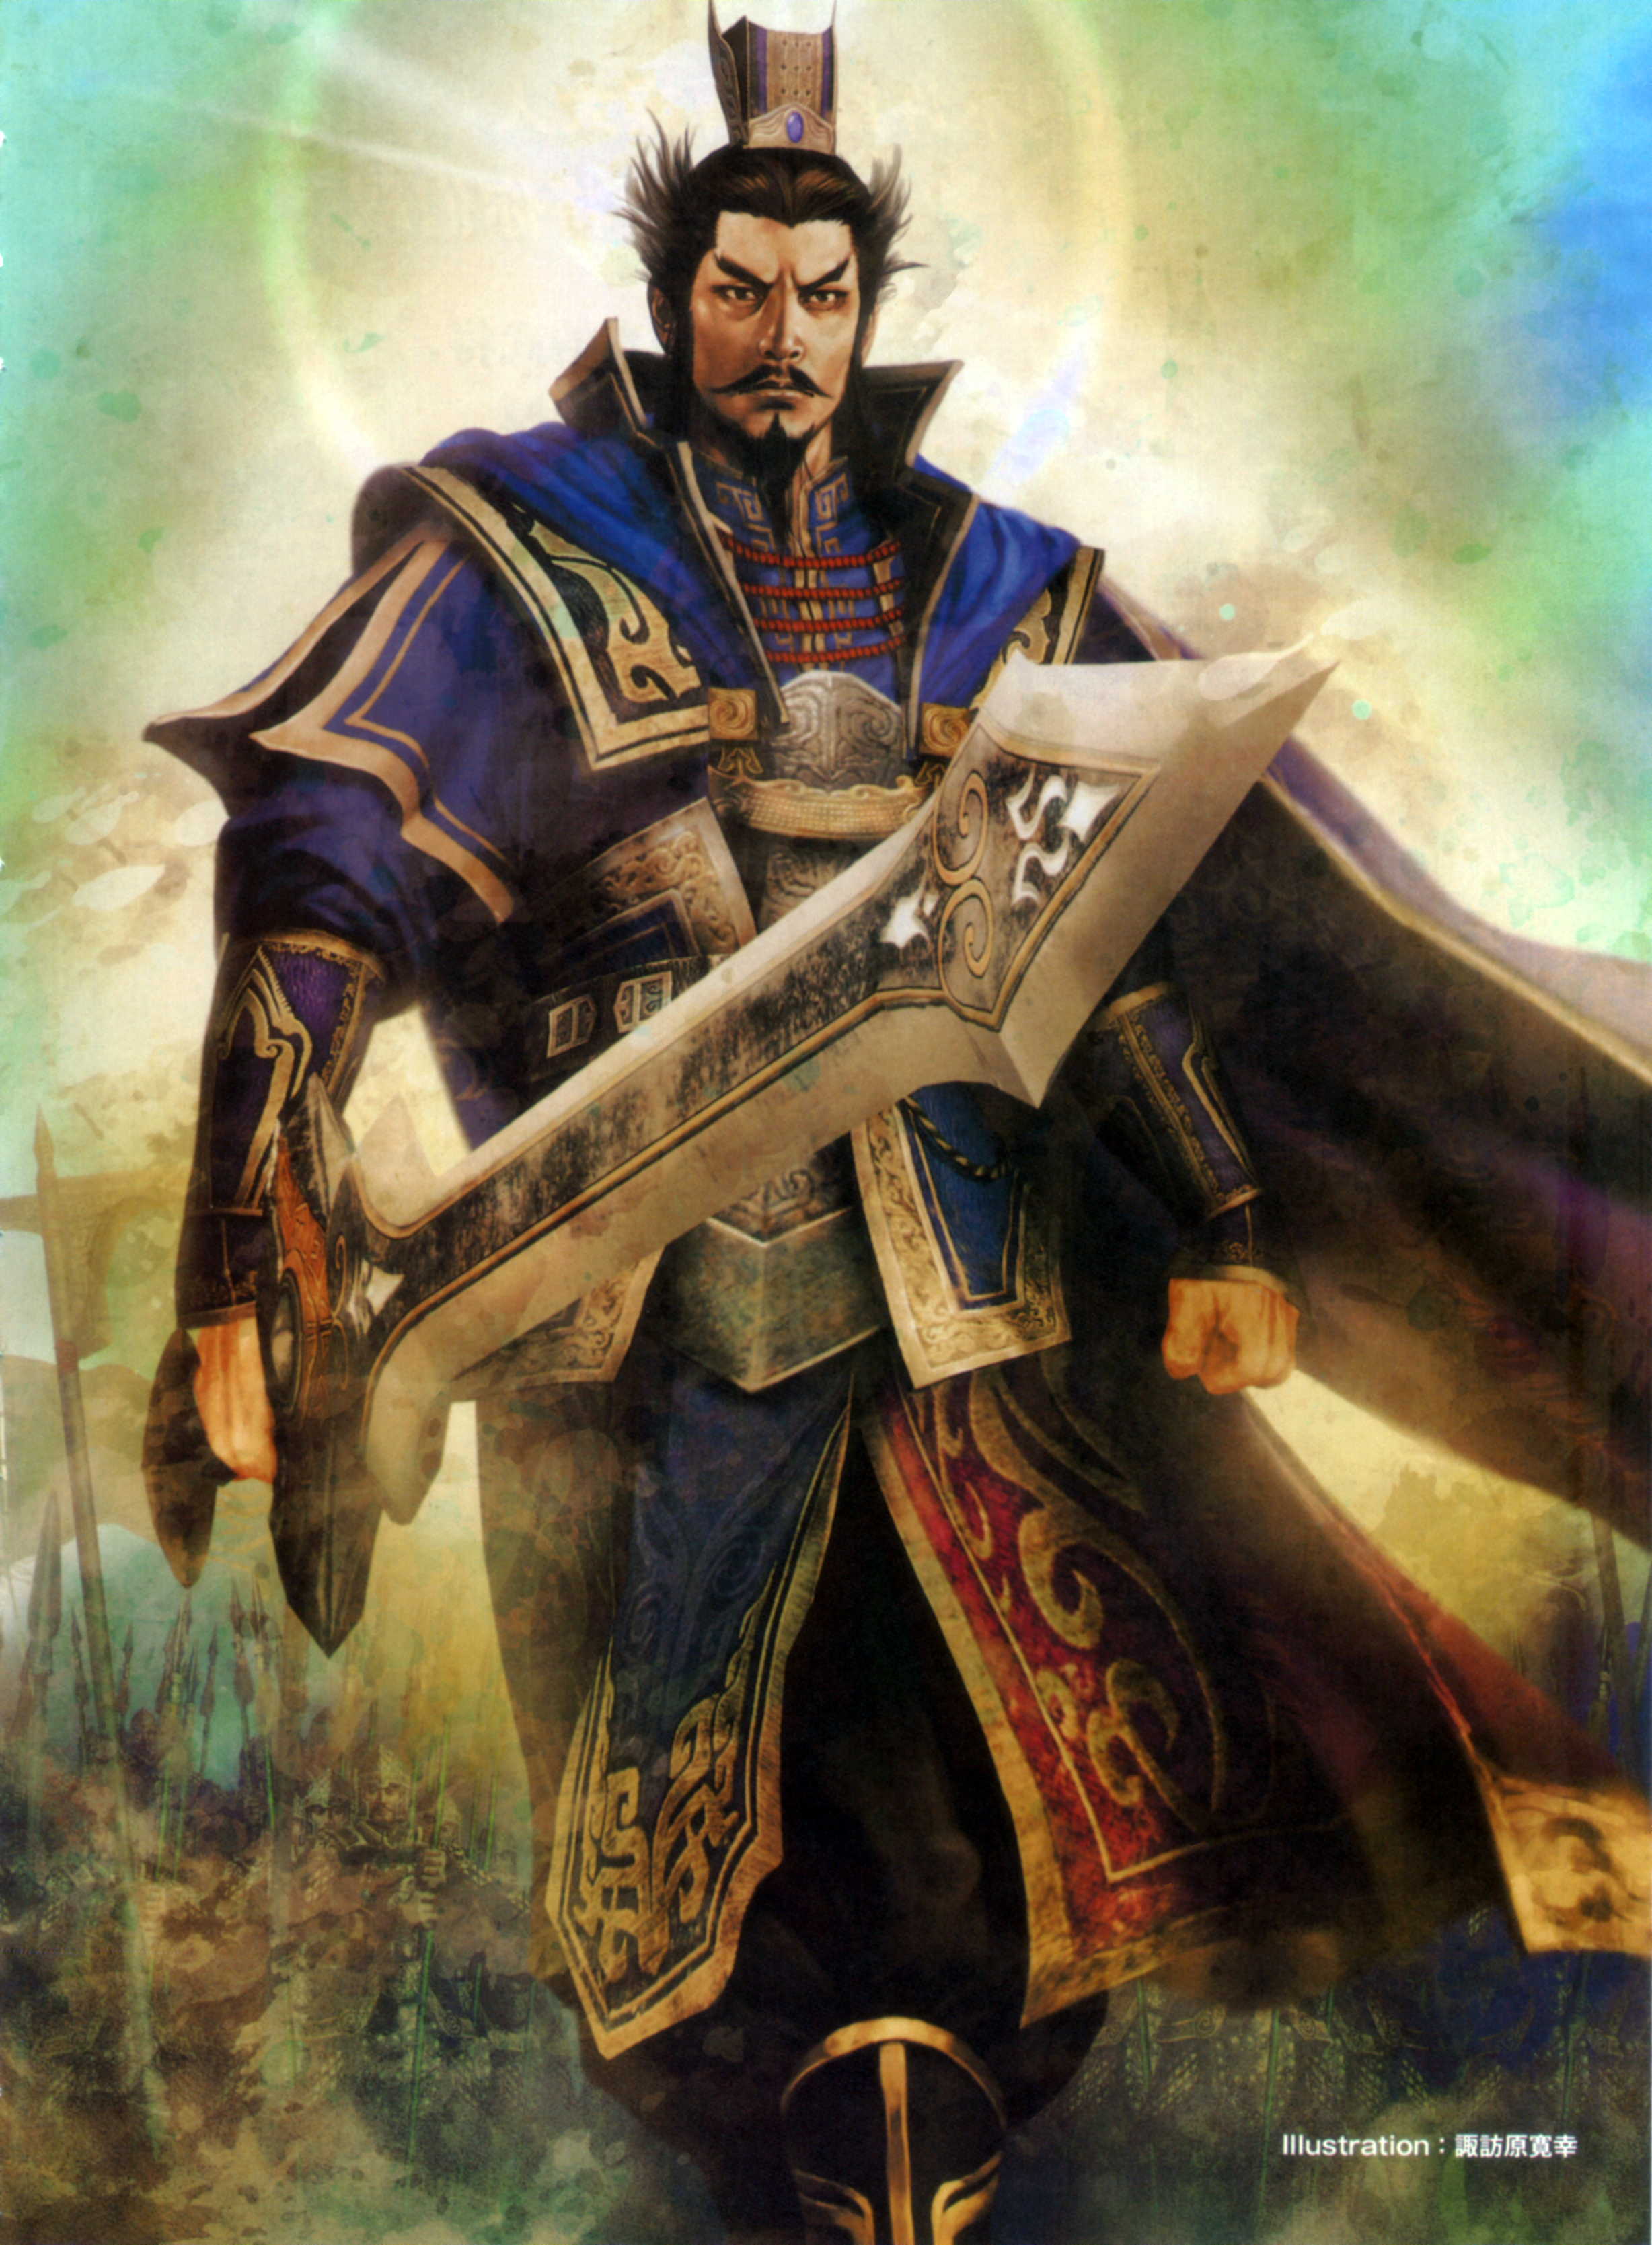 Cao Cao screenshots, image and picture